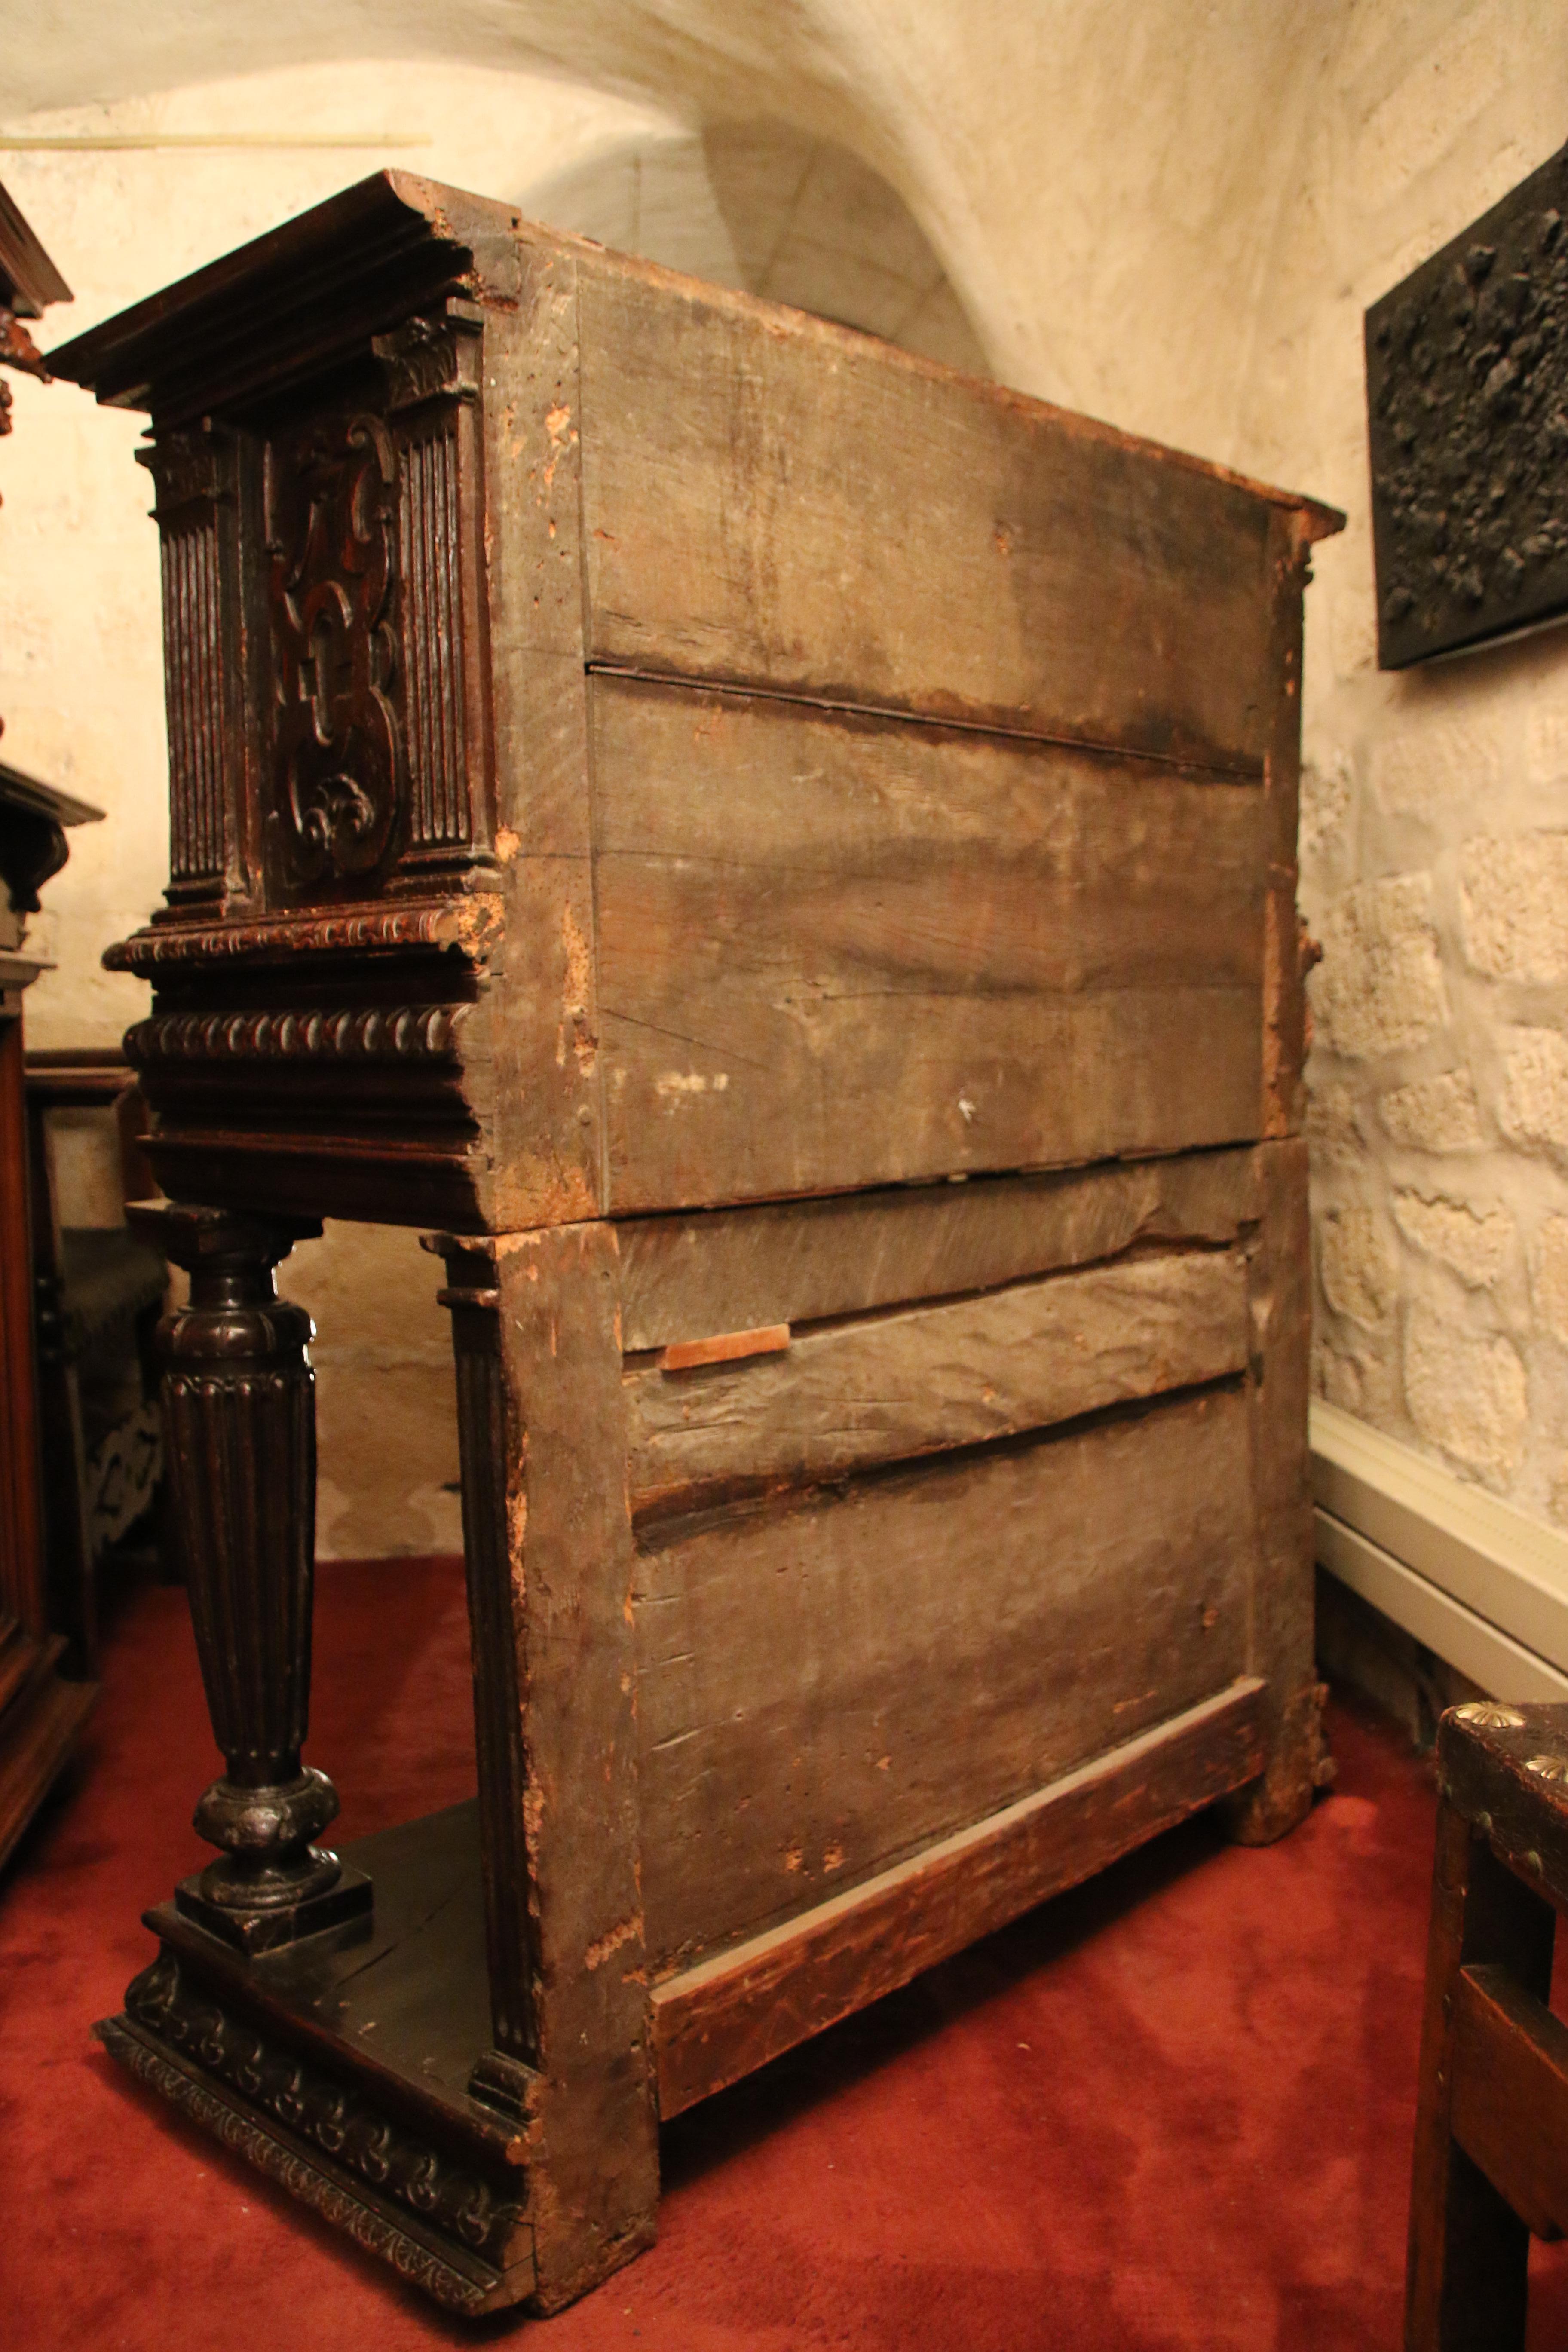 The Middle Ages dresser is a piece of furniture divided in two parts. The bottom part is open while the upper part is full and closed.

The upper part is decorated with an abundance of carving on the front and the sides. It is made up of two doors